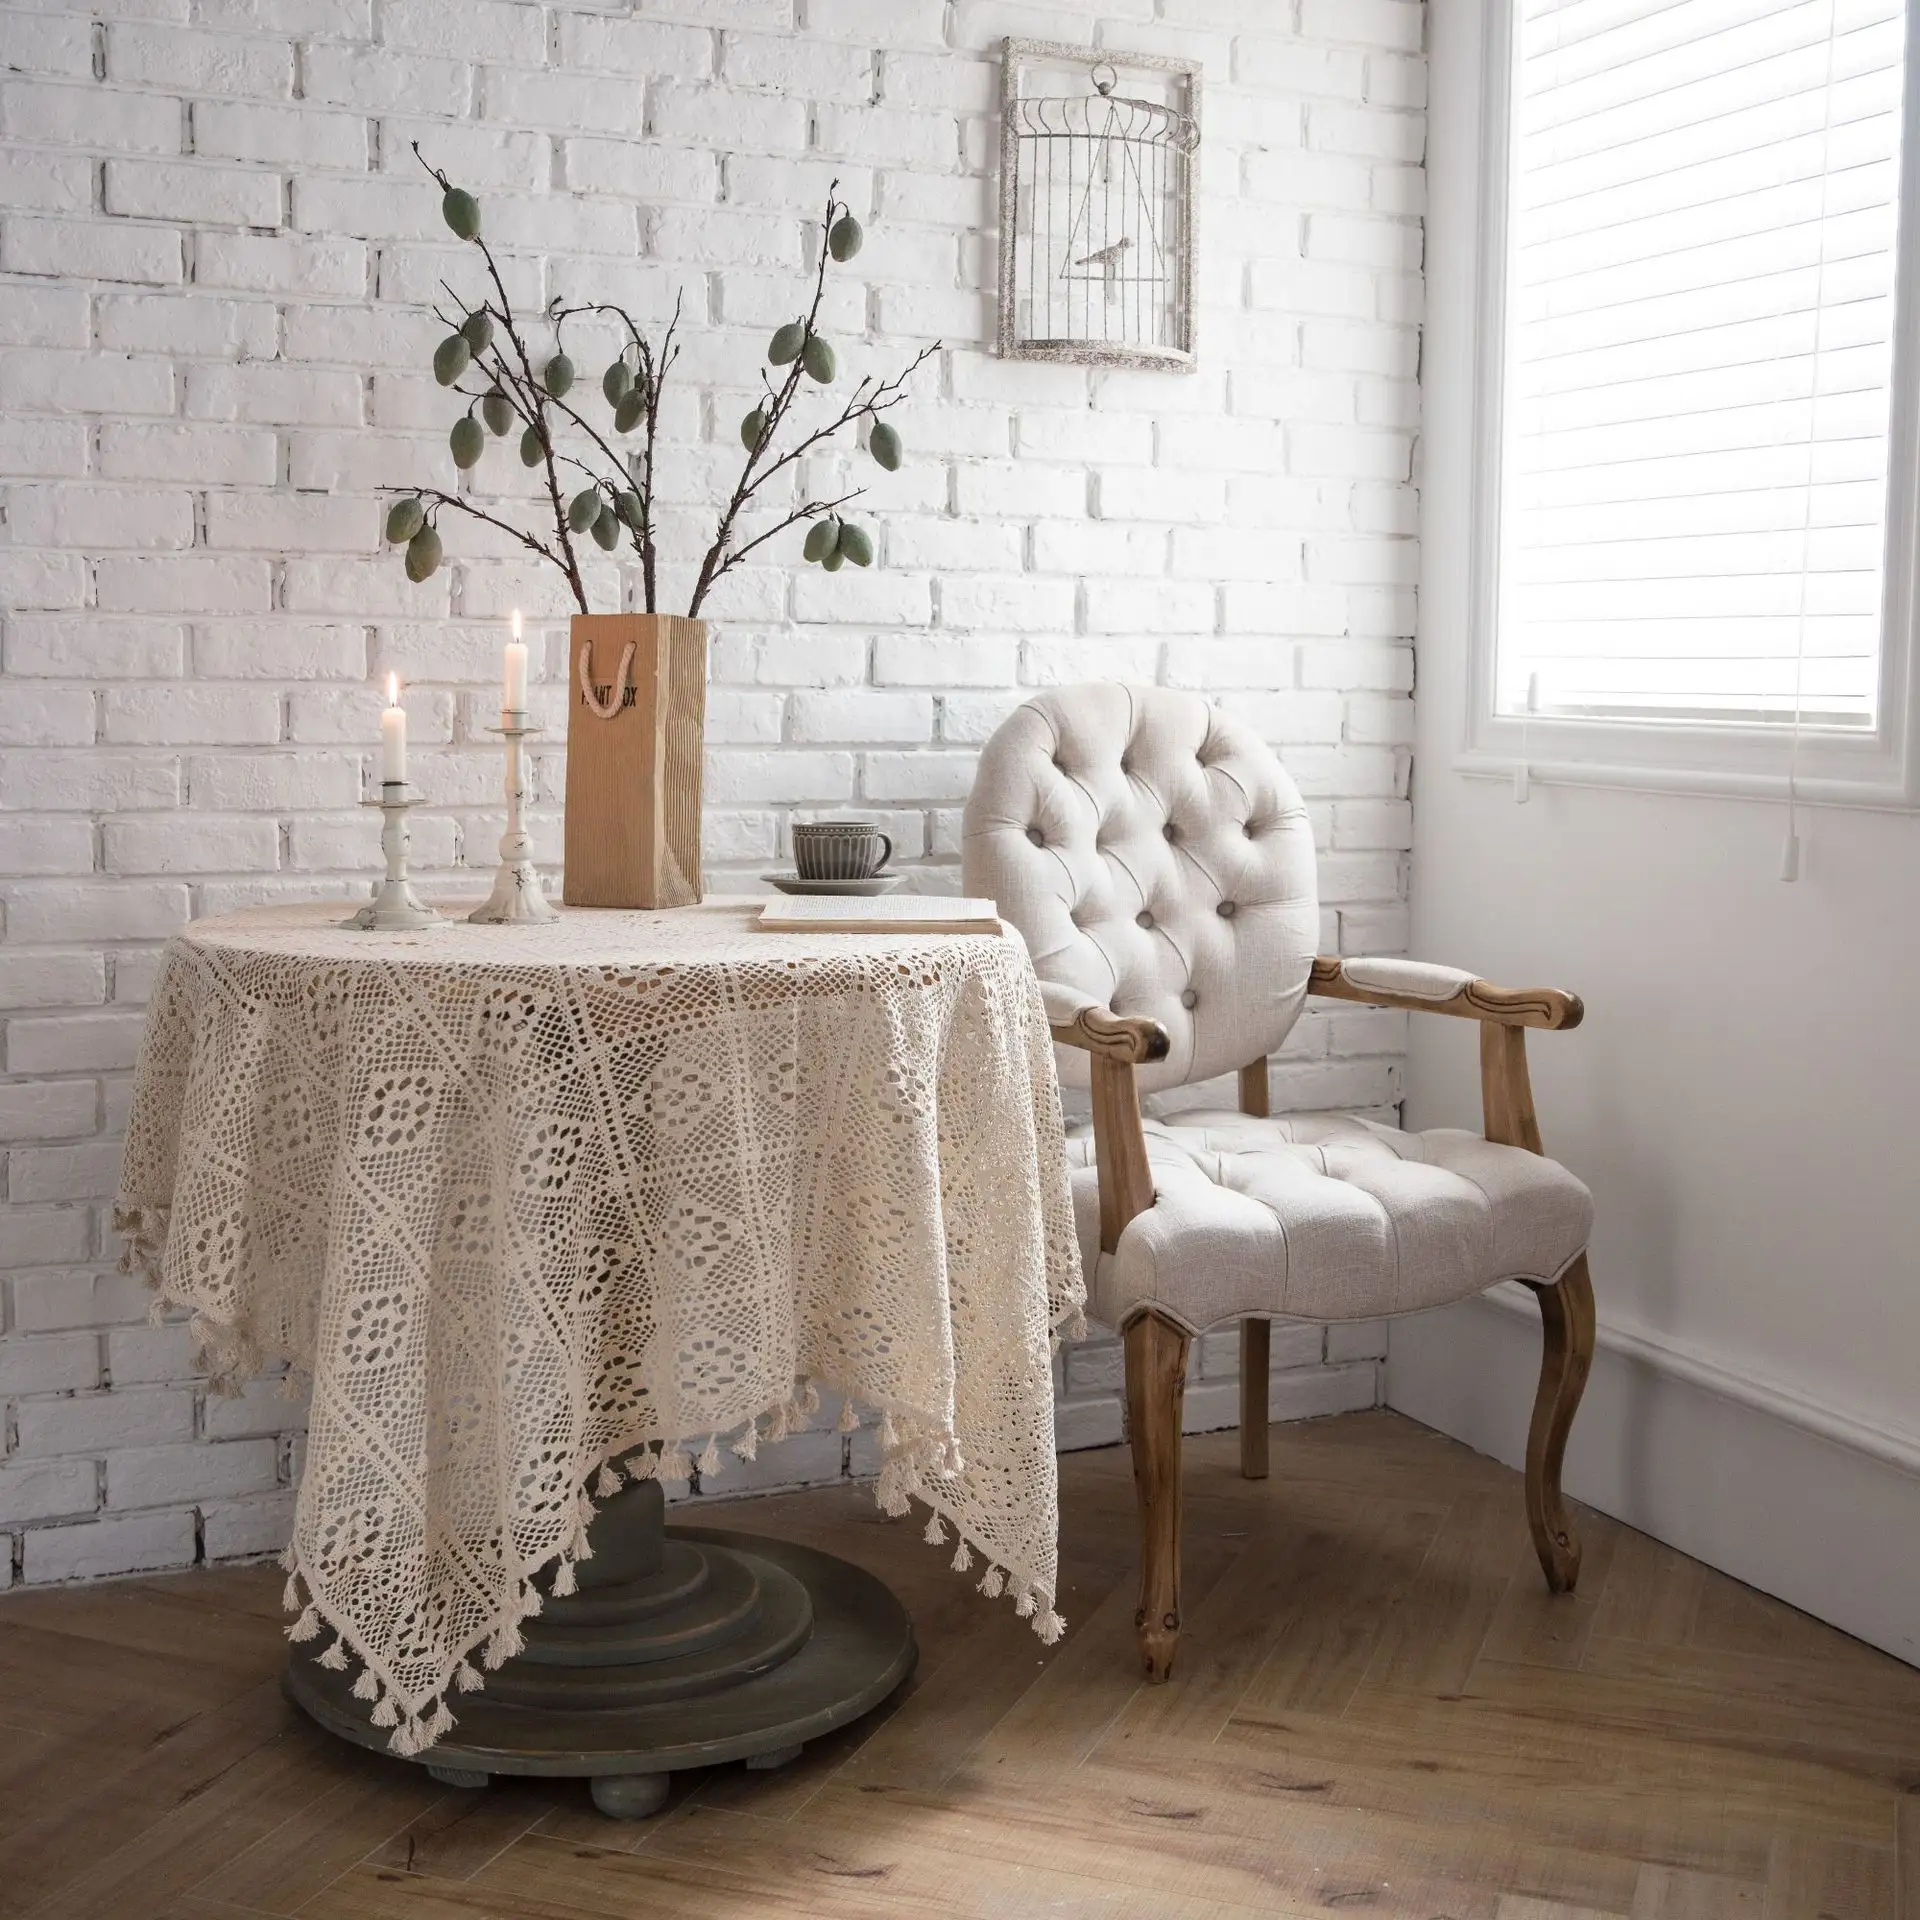 Elegant macrame crocheted knit cotton lace tablecloths white wedding table cloth for party